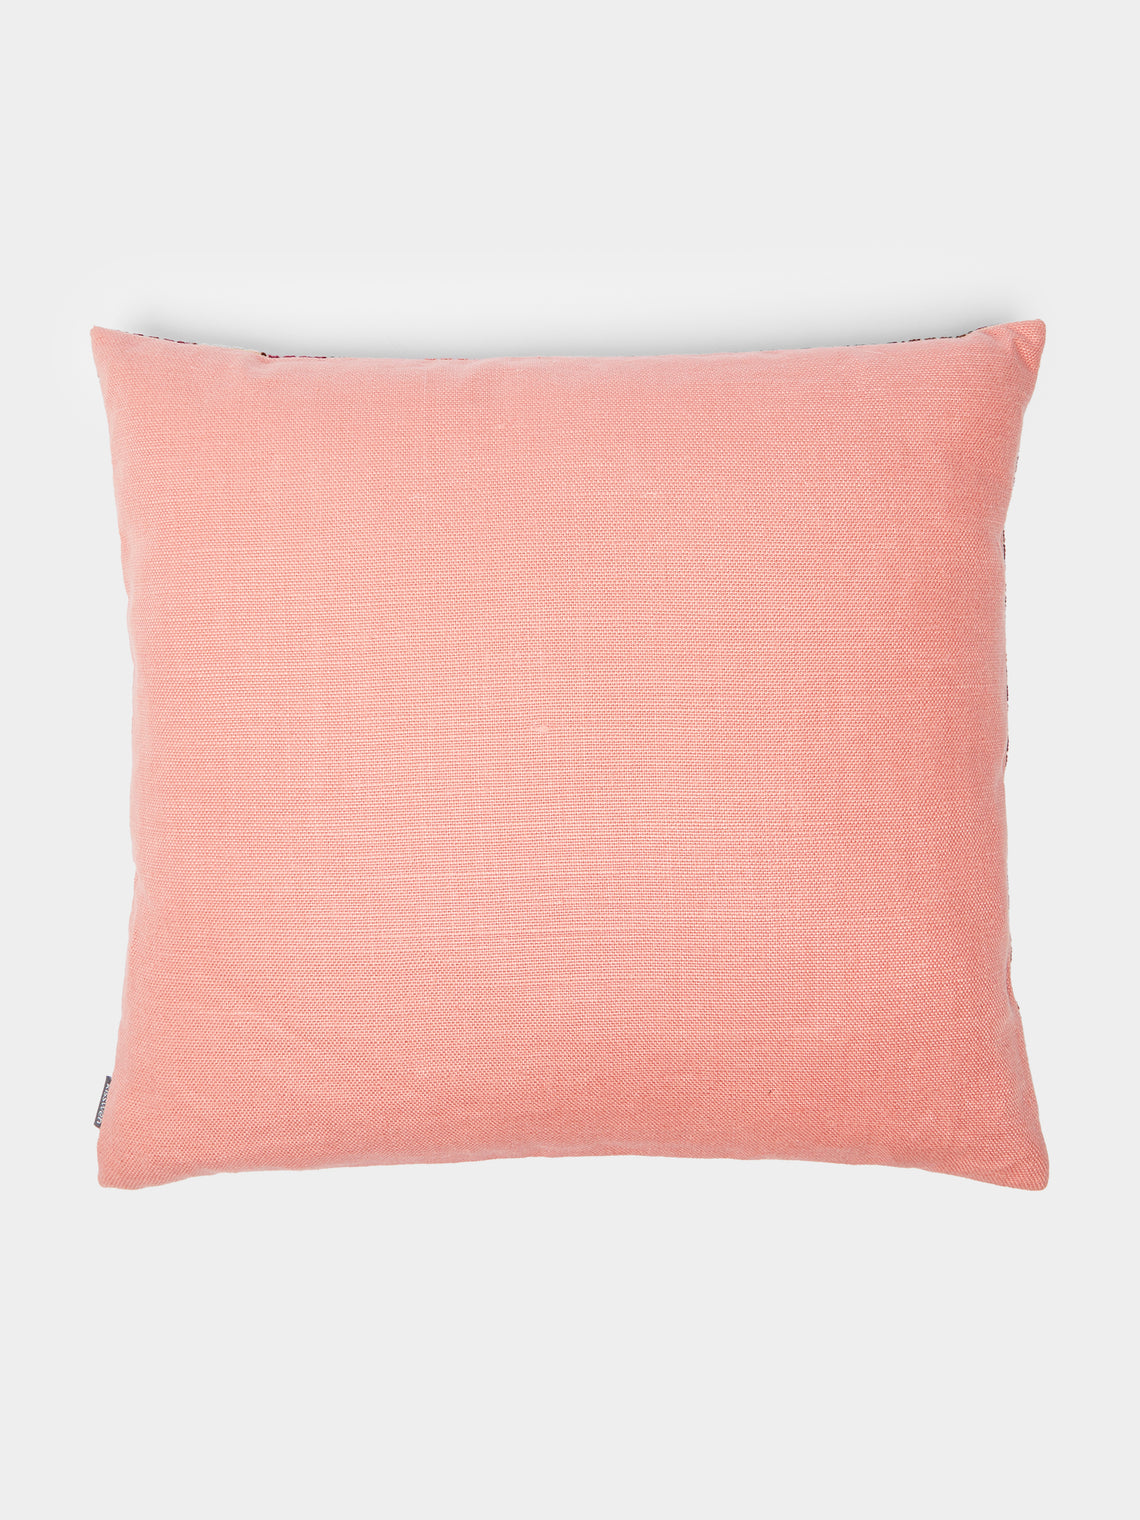 Kissweh - Damask Rose Hand-Embroidered Cotton Cushion -  - ABASK